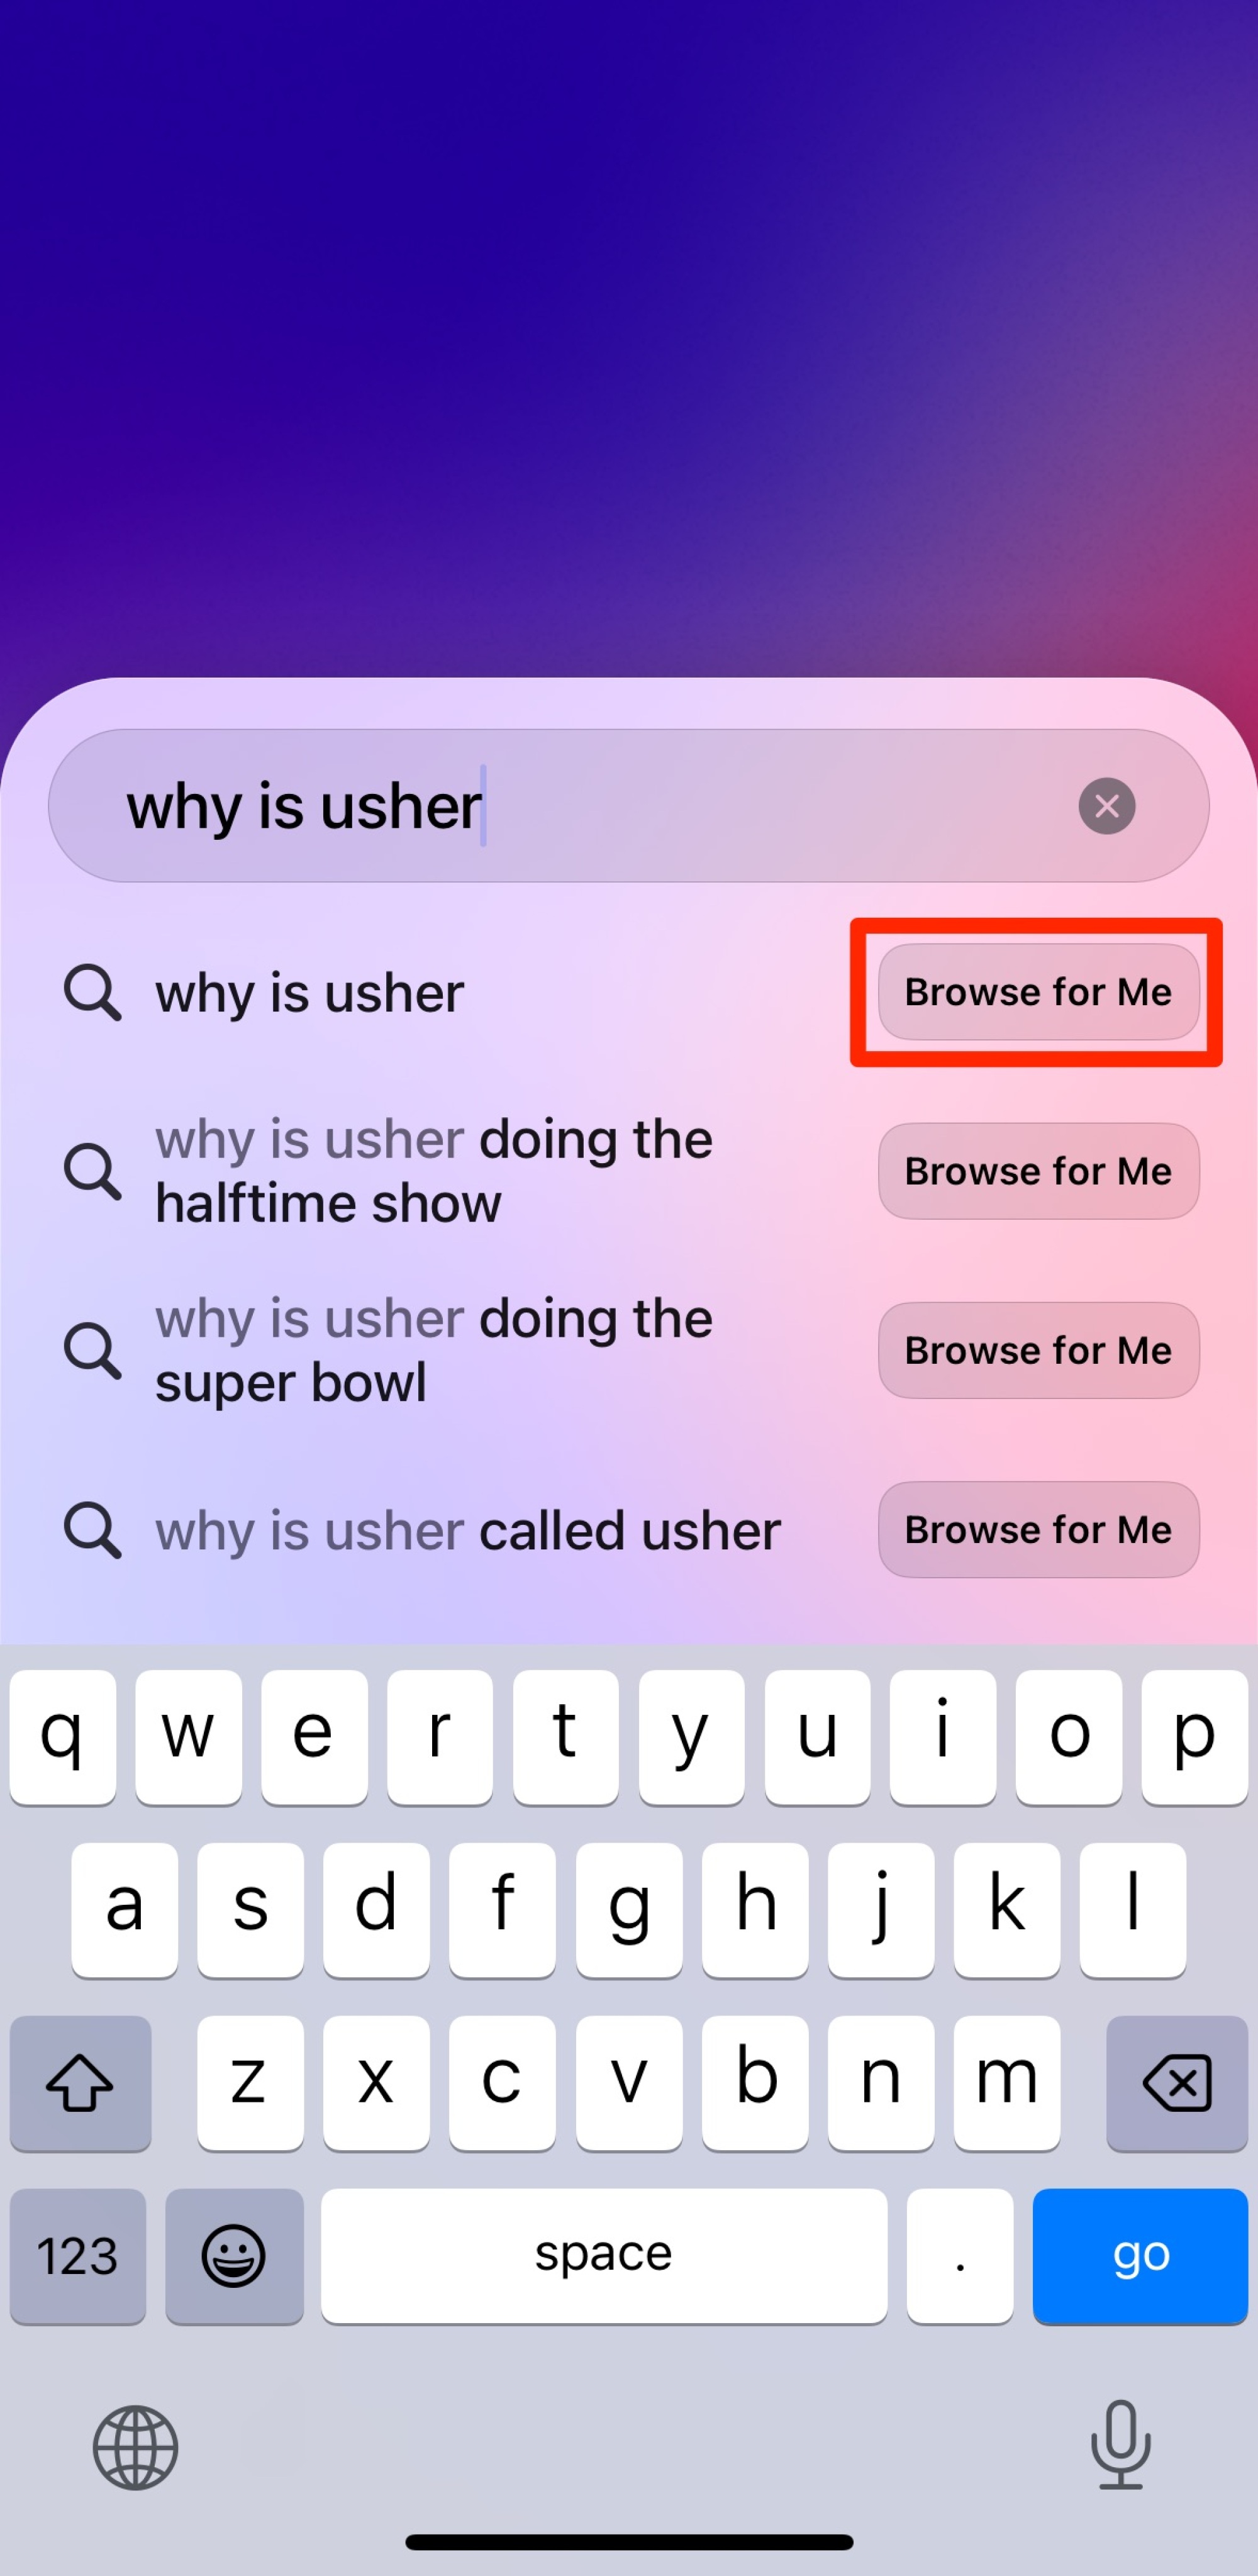 arc search bar showing query for “why is usher…” next to the browse for you button